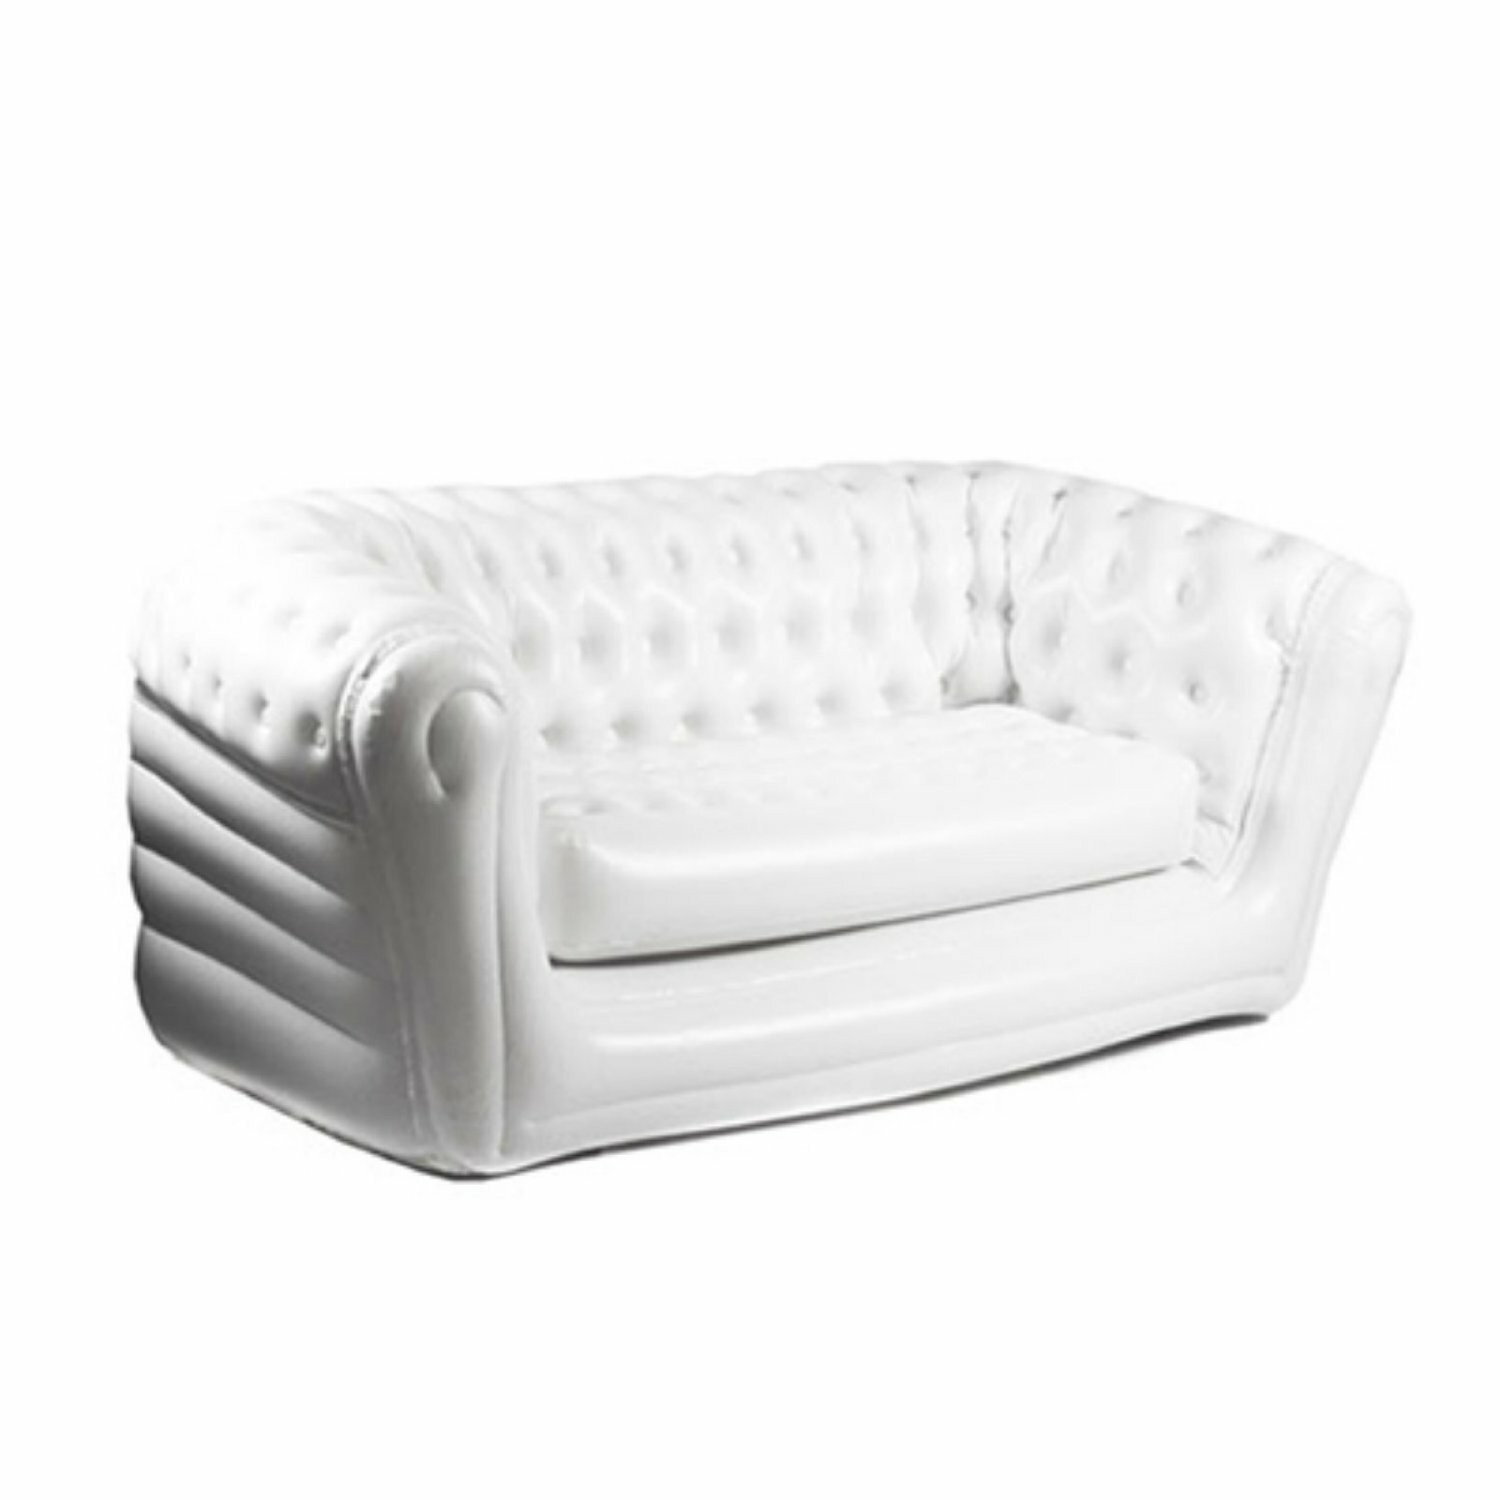 ChestAIRfield 2 Person Inflatable Chesterfield Sofa